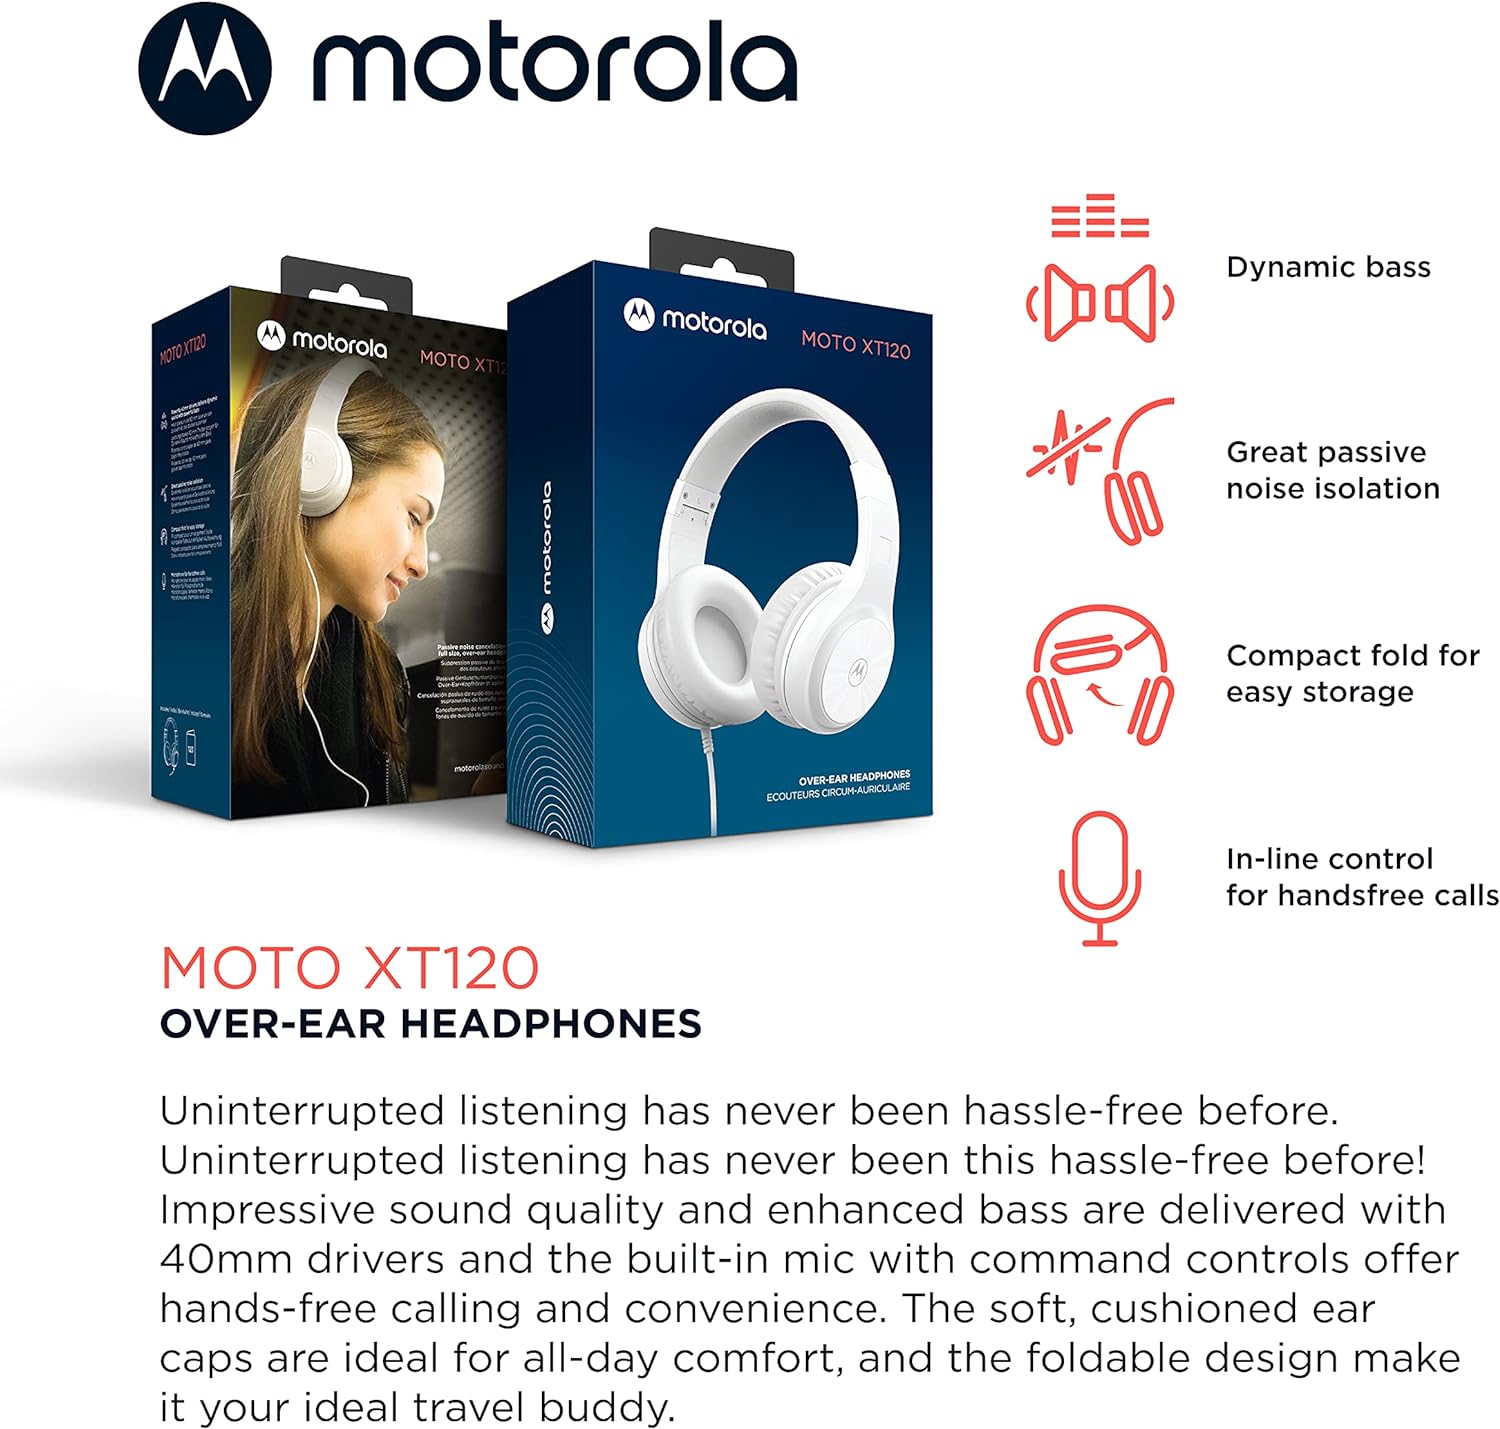 Motorola Over-Ear Headphones Wired - Moto XT120 Headphones with Microphone, in-Line Control for Calls - Foldable Head Phones, Adjustable Cushioned Headband - Dynamic Bass, Clear Sound - White